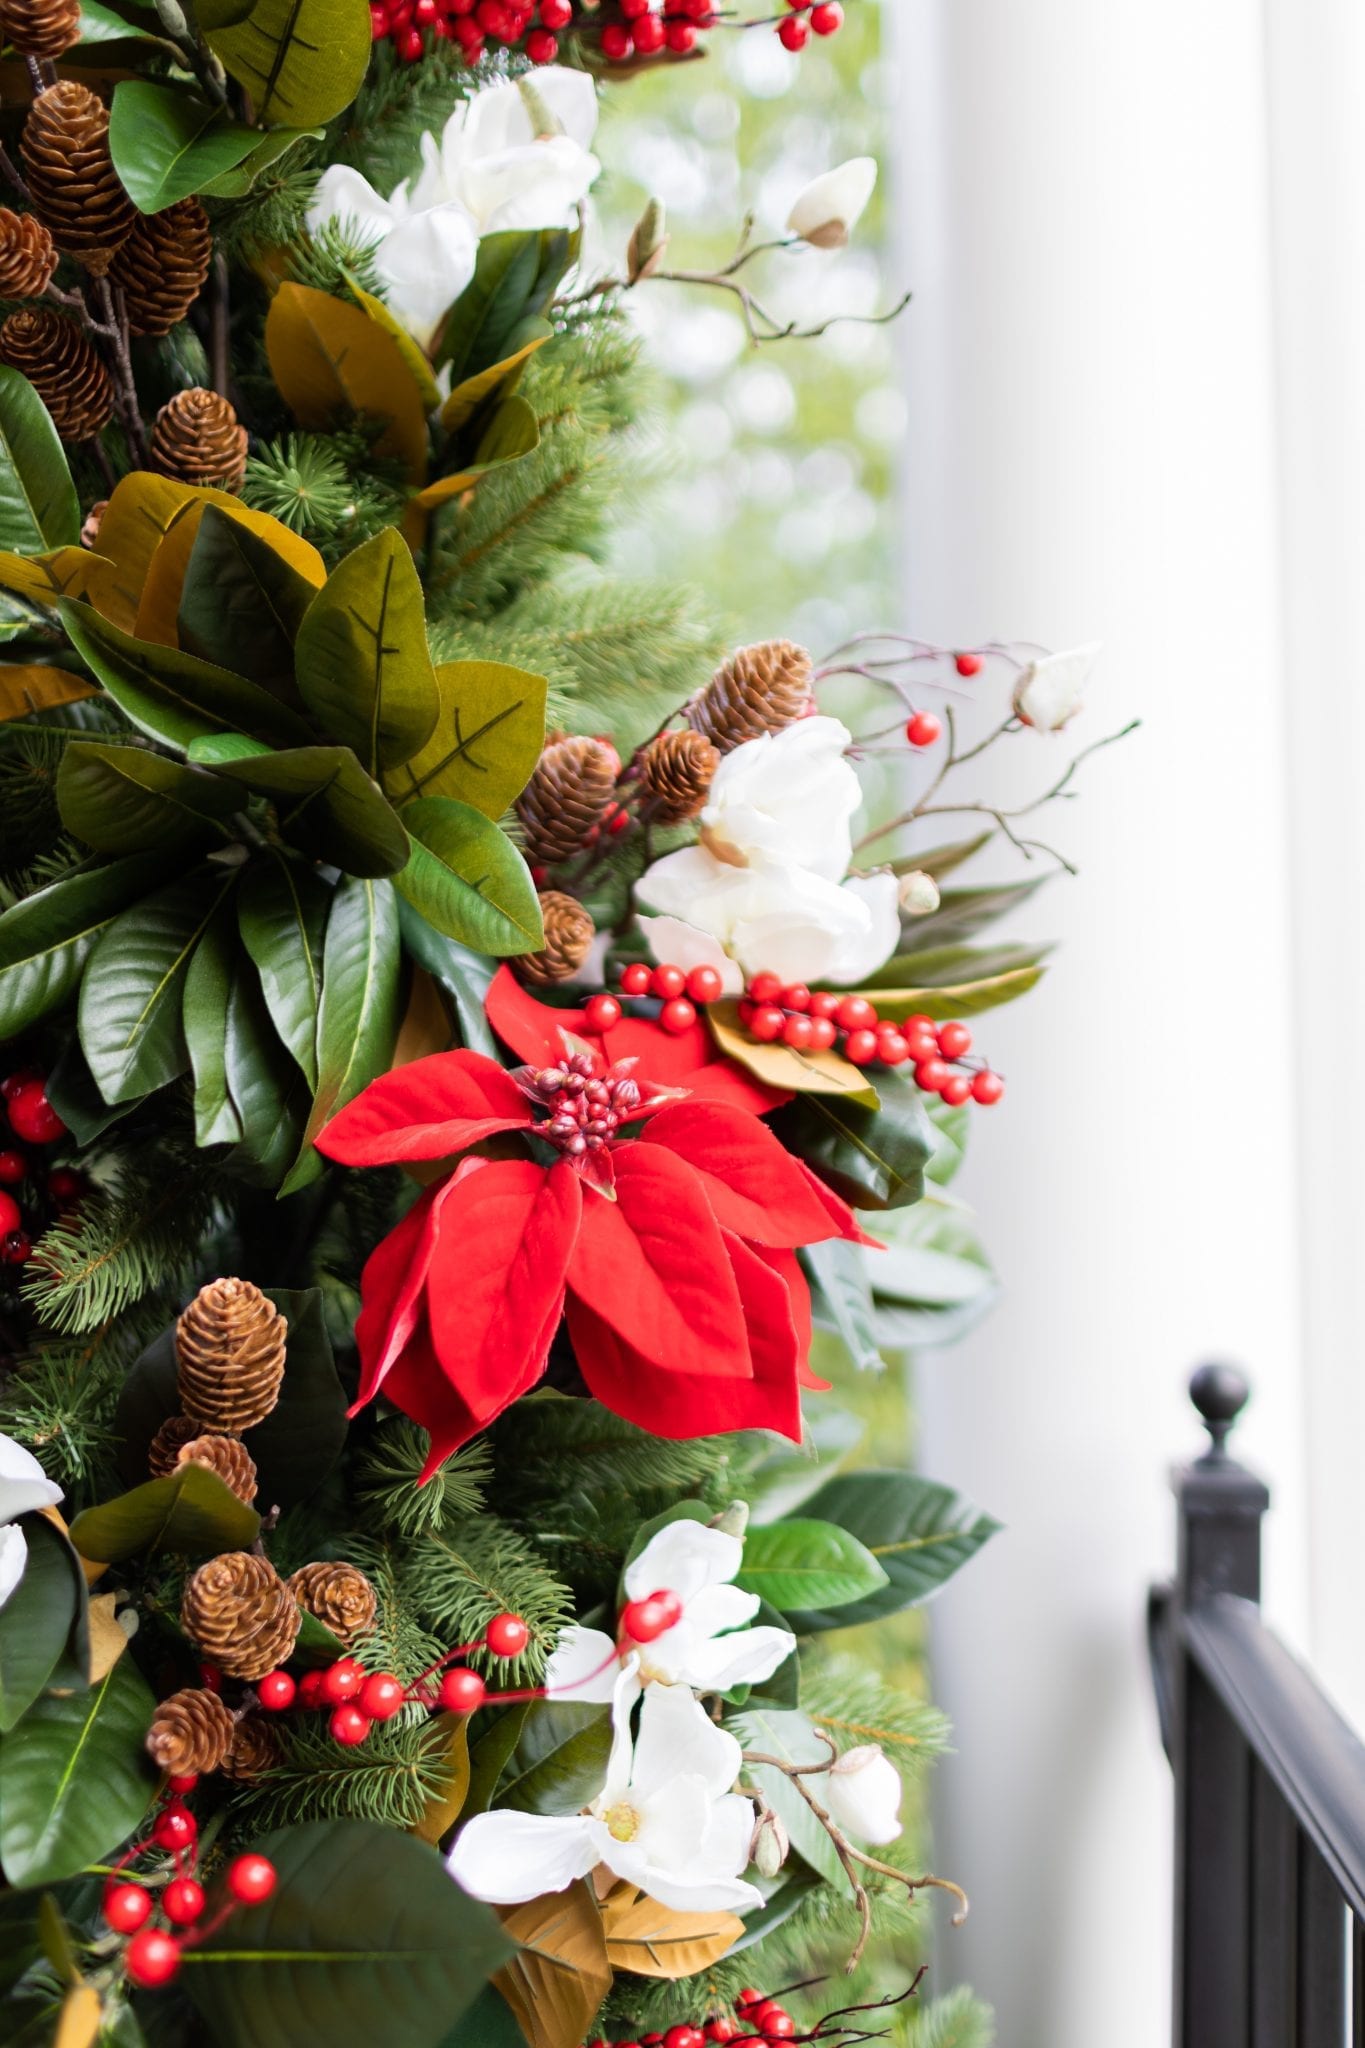 To create a simply southern Christmas, you need basic ingredients: magnolia, poinsettia & a bit of the outdoors! This magnolia tree is beautiful both inside or for balcony christmas decorations! If you need Christmas balcony ideas, this tree along with artificial poinsettia plants for outside may be just the ticket!